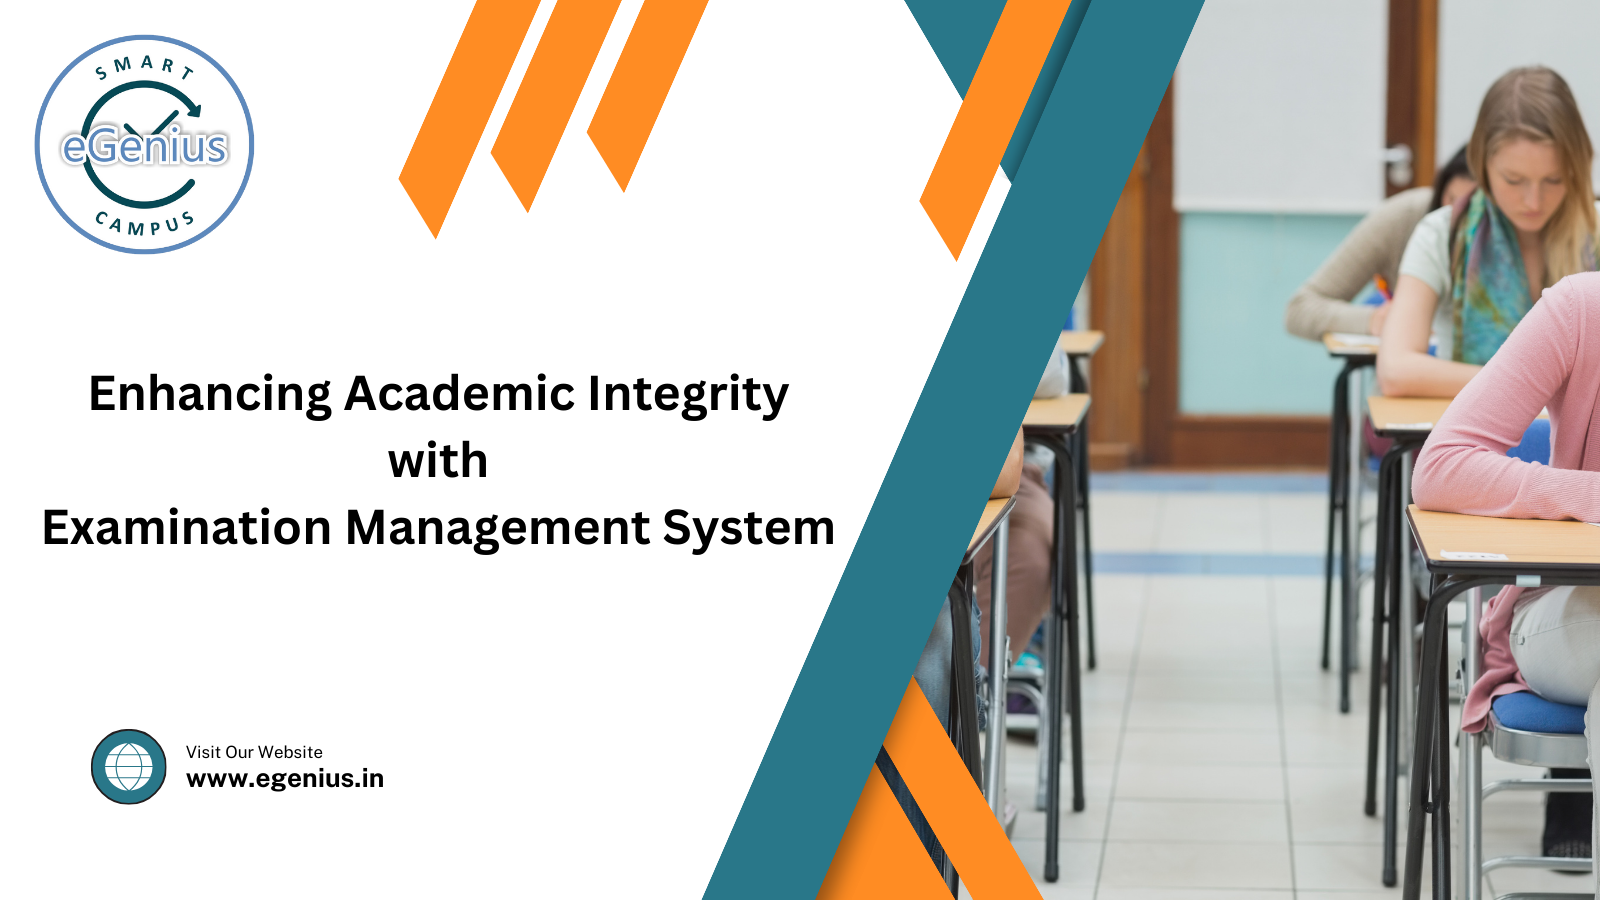 Enhancing Academic Integrity with Examination Management System  